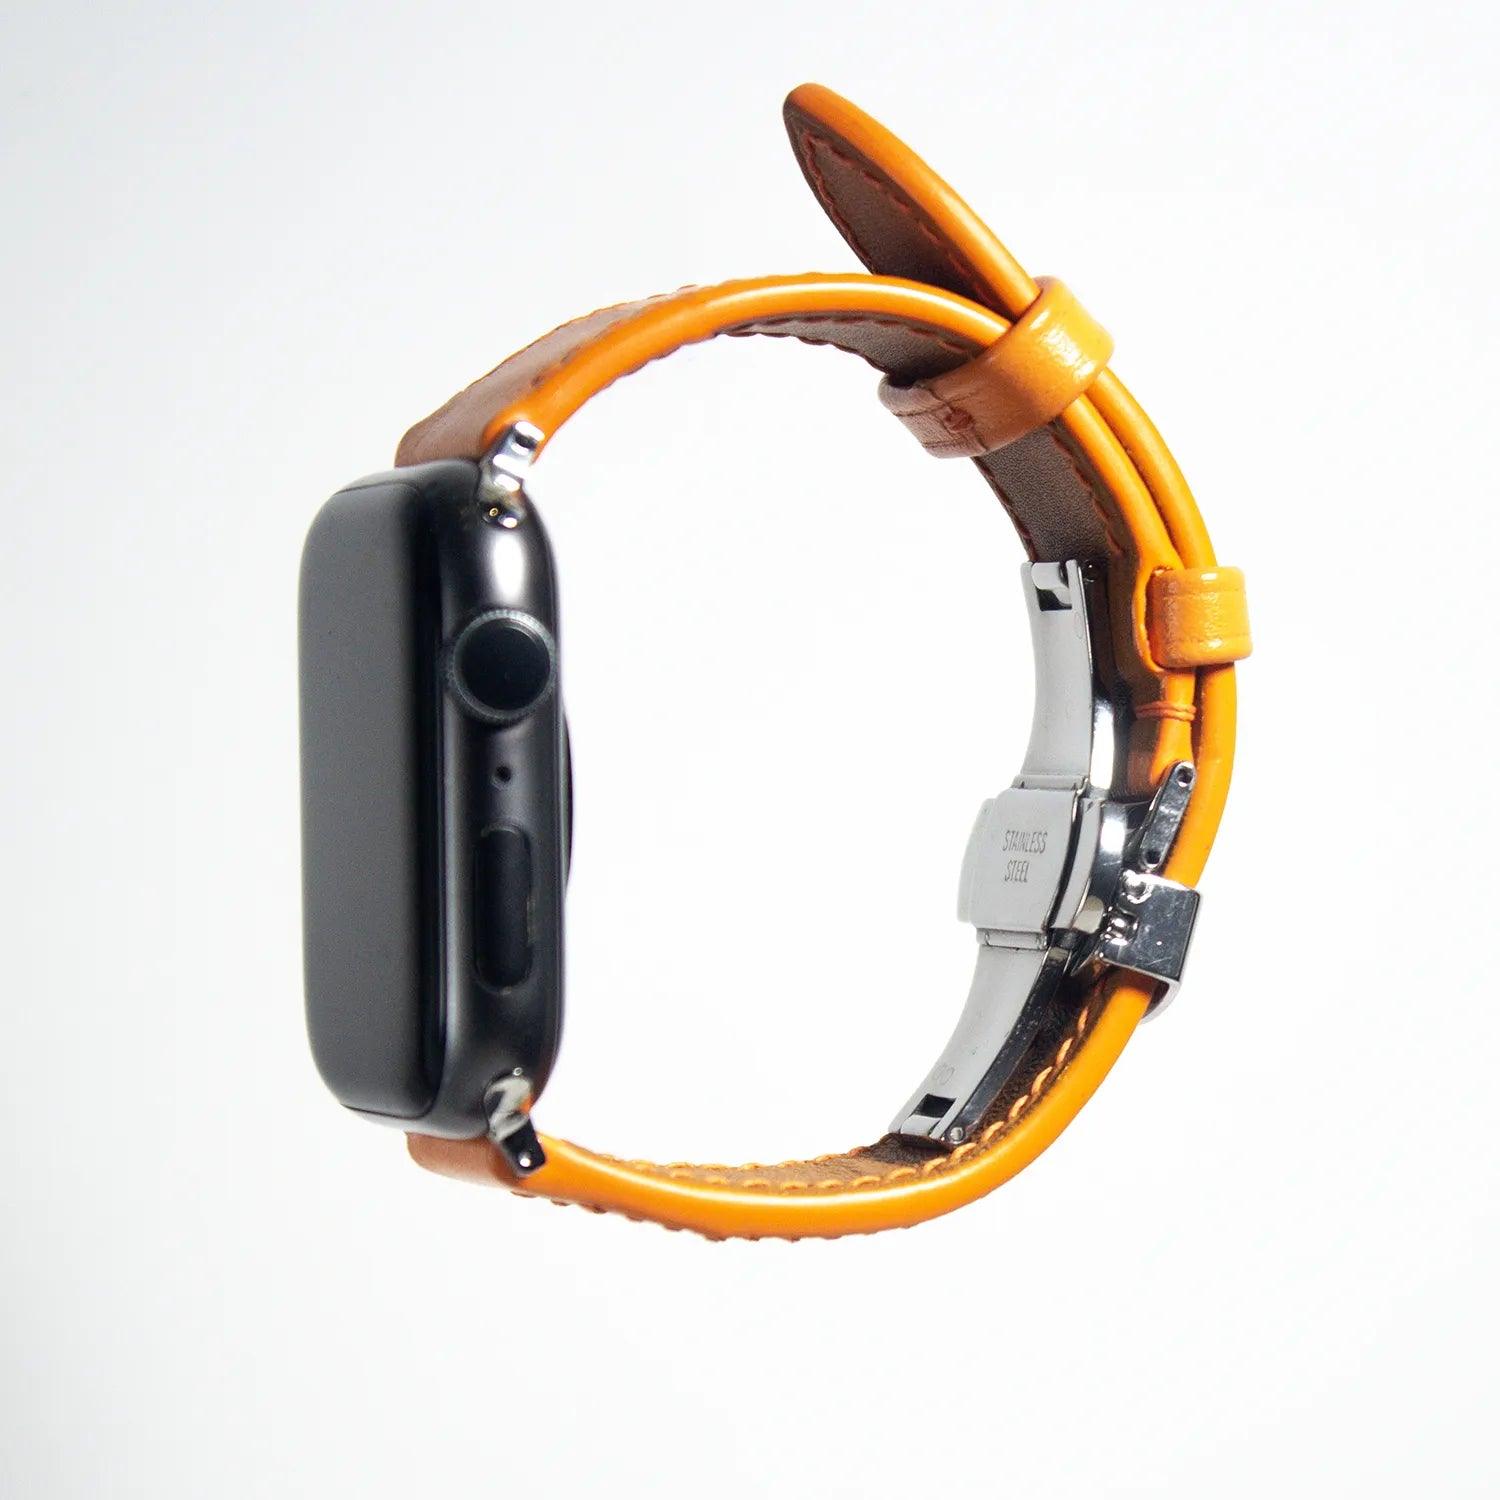 Stand out with this apple watch leather band in vivid orange Swift leather, blending vibrancy with elegance.